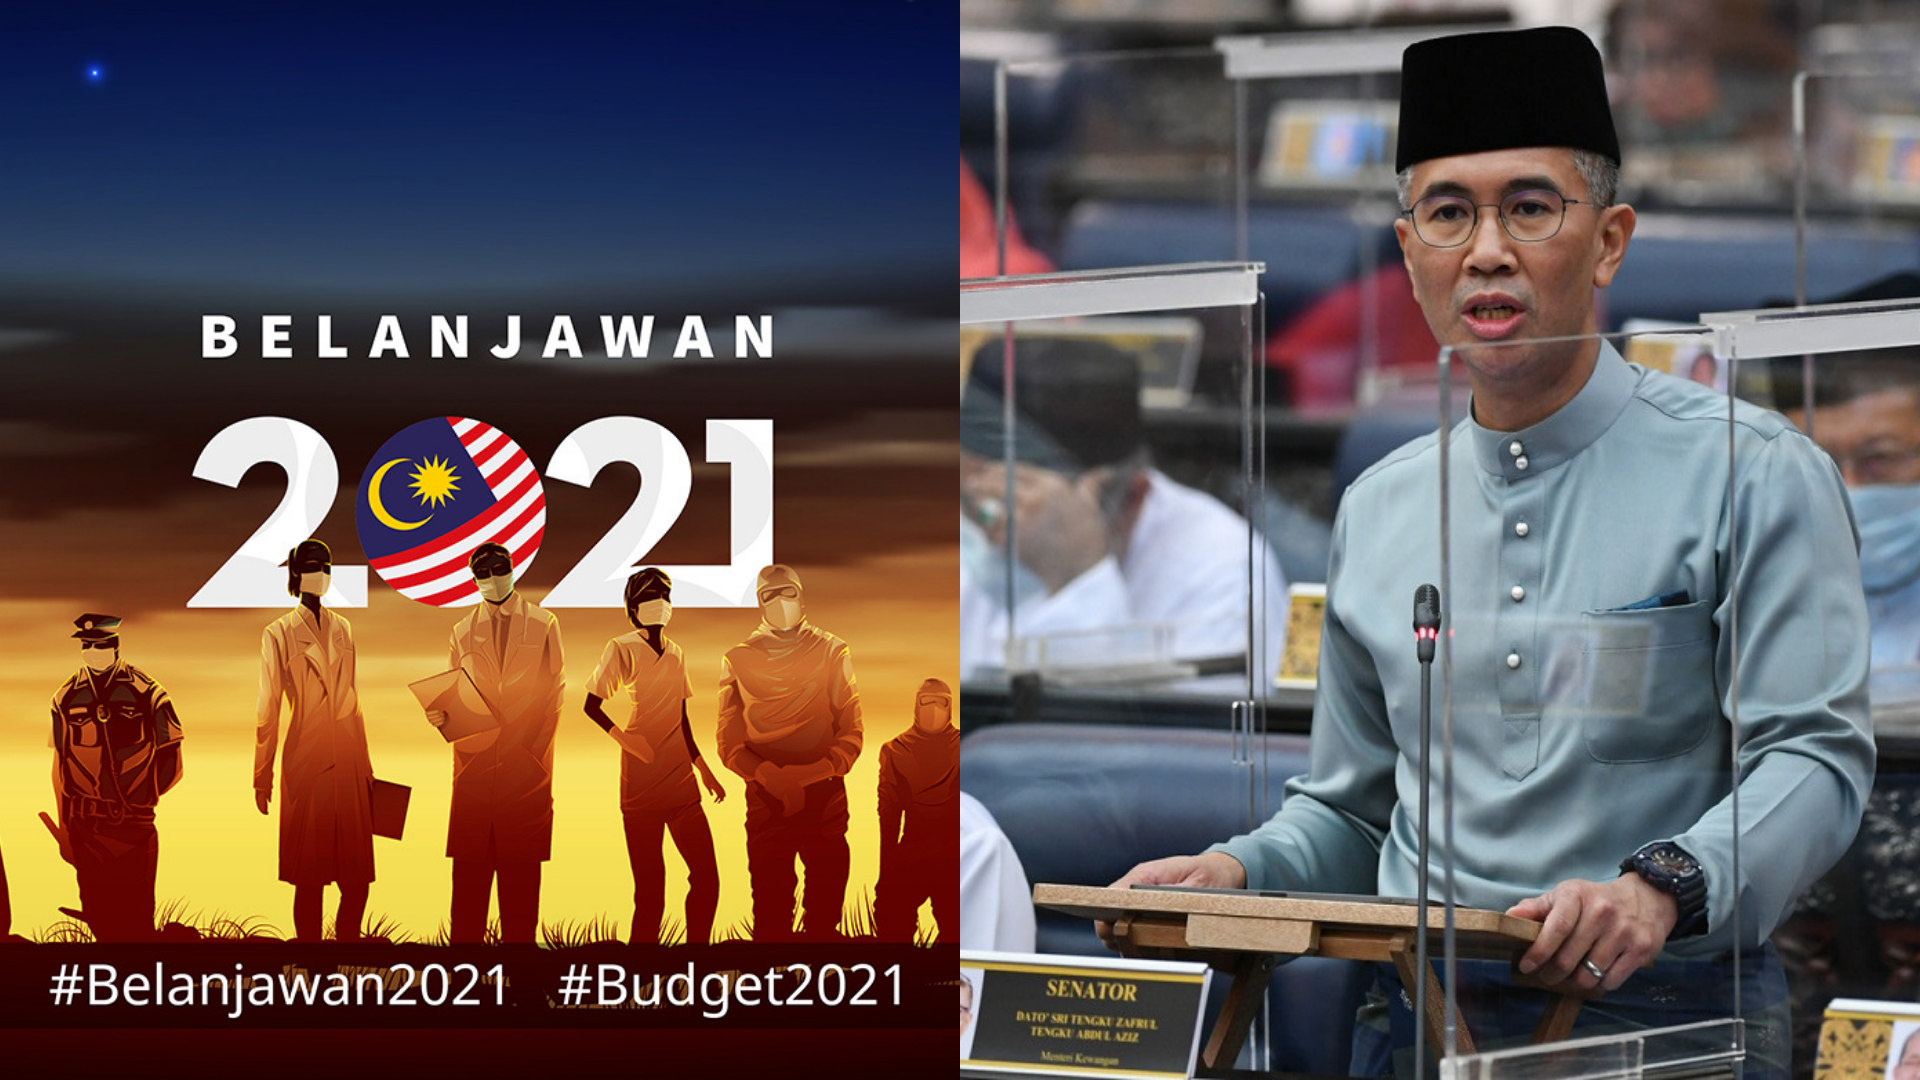 Malaysia Budget 2021 Highlights And Summary From The Parliamentary Reading On 6 Nov 2020 Klook Travel Blog